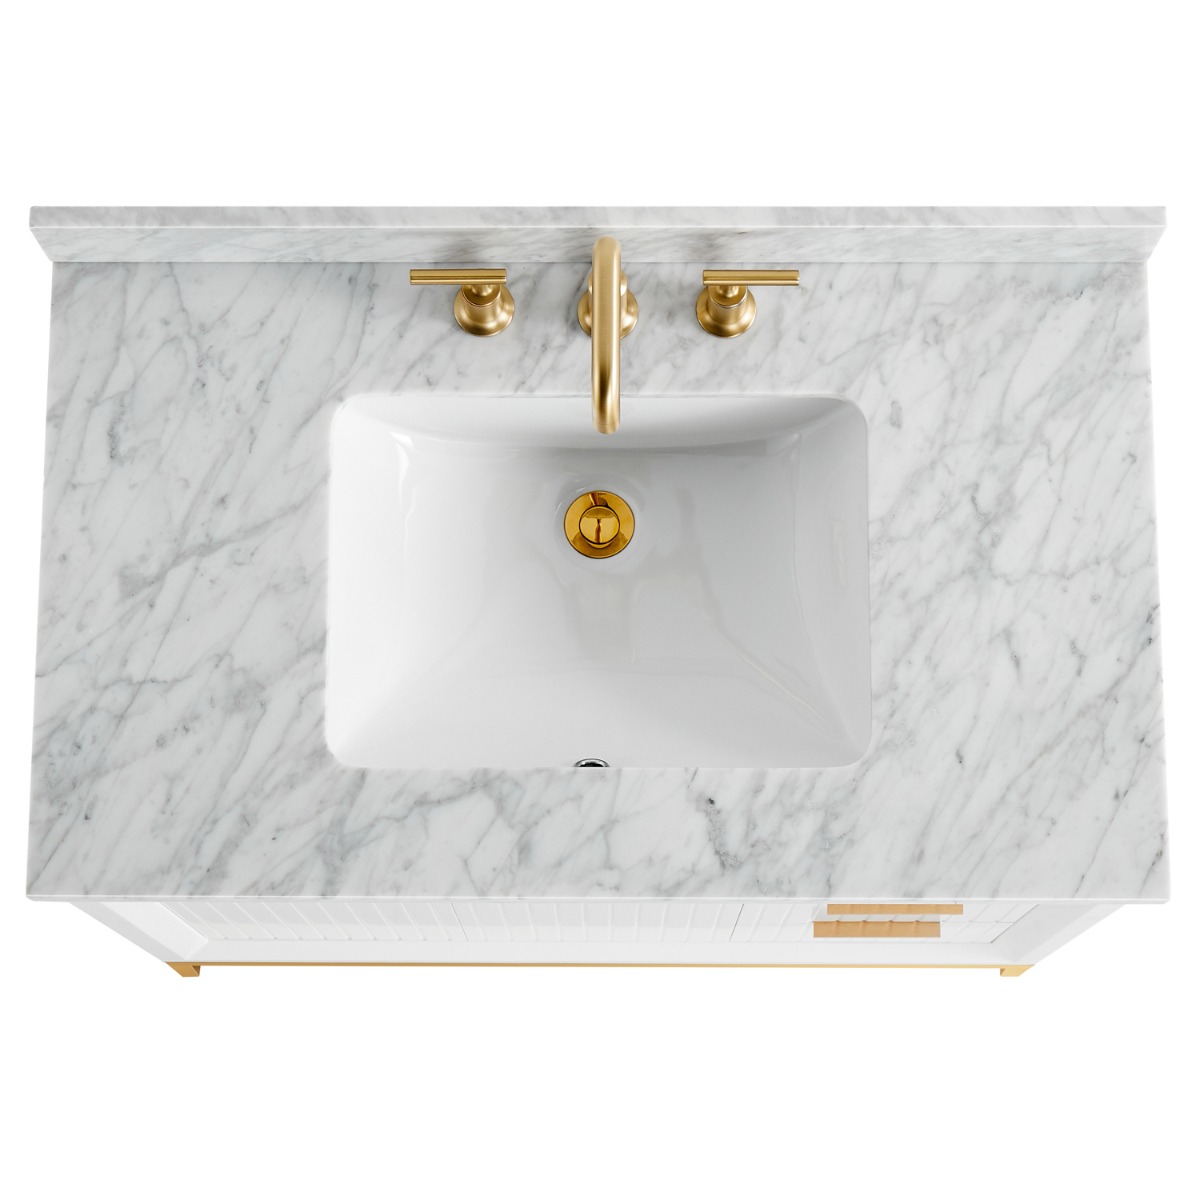 Bungalow White and Gold 36" Single Vanity with Carrara Marble Top